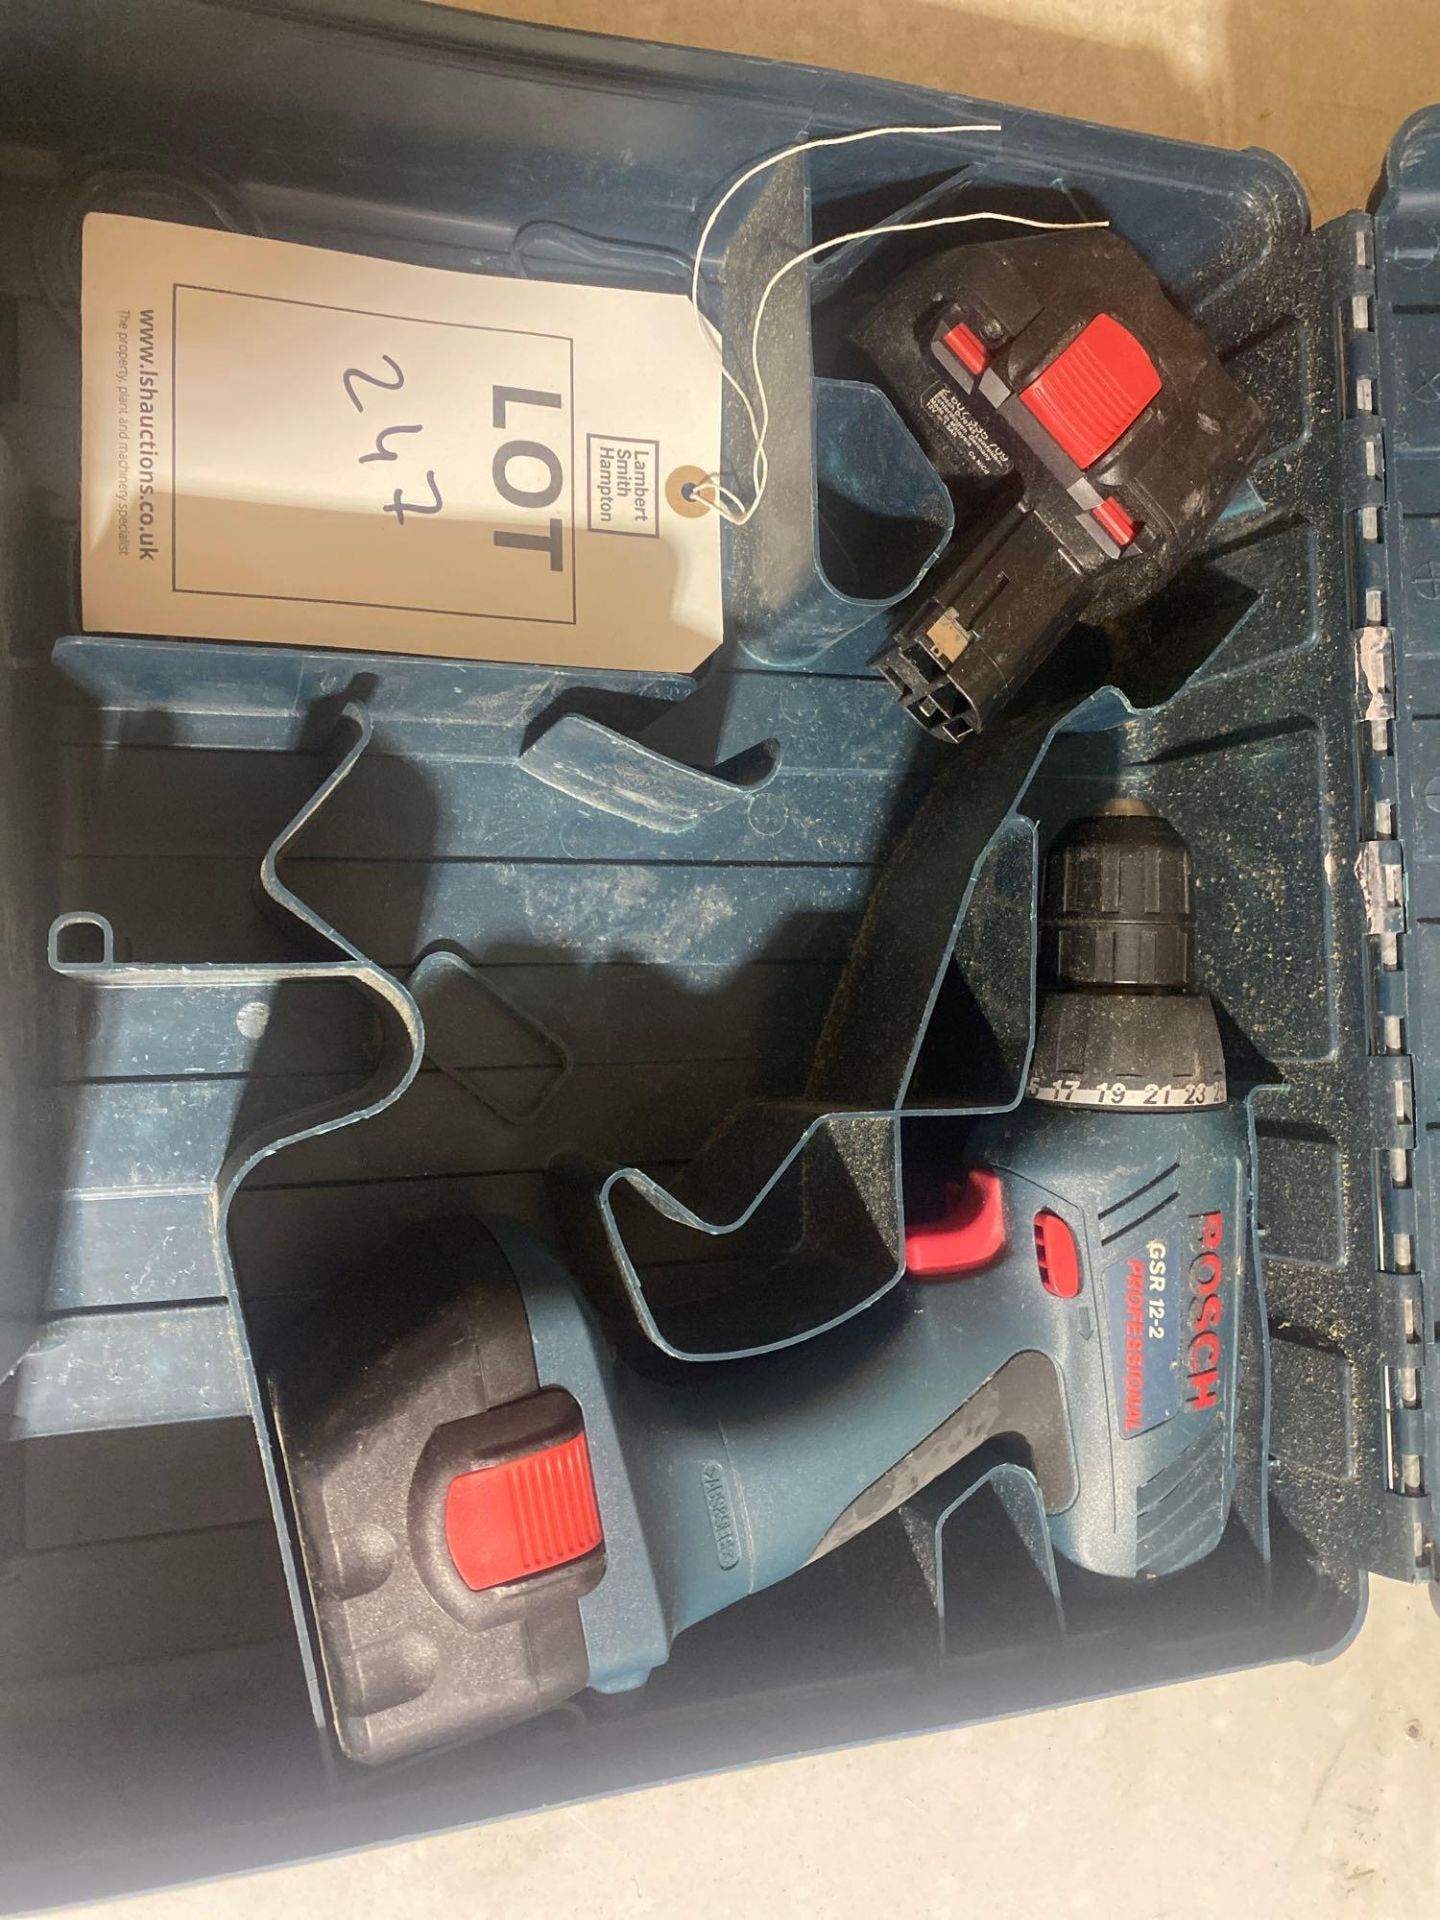 Bosch GSR-12-2 cordless drill - please note no charger - Image 2 of 3